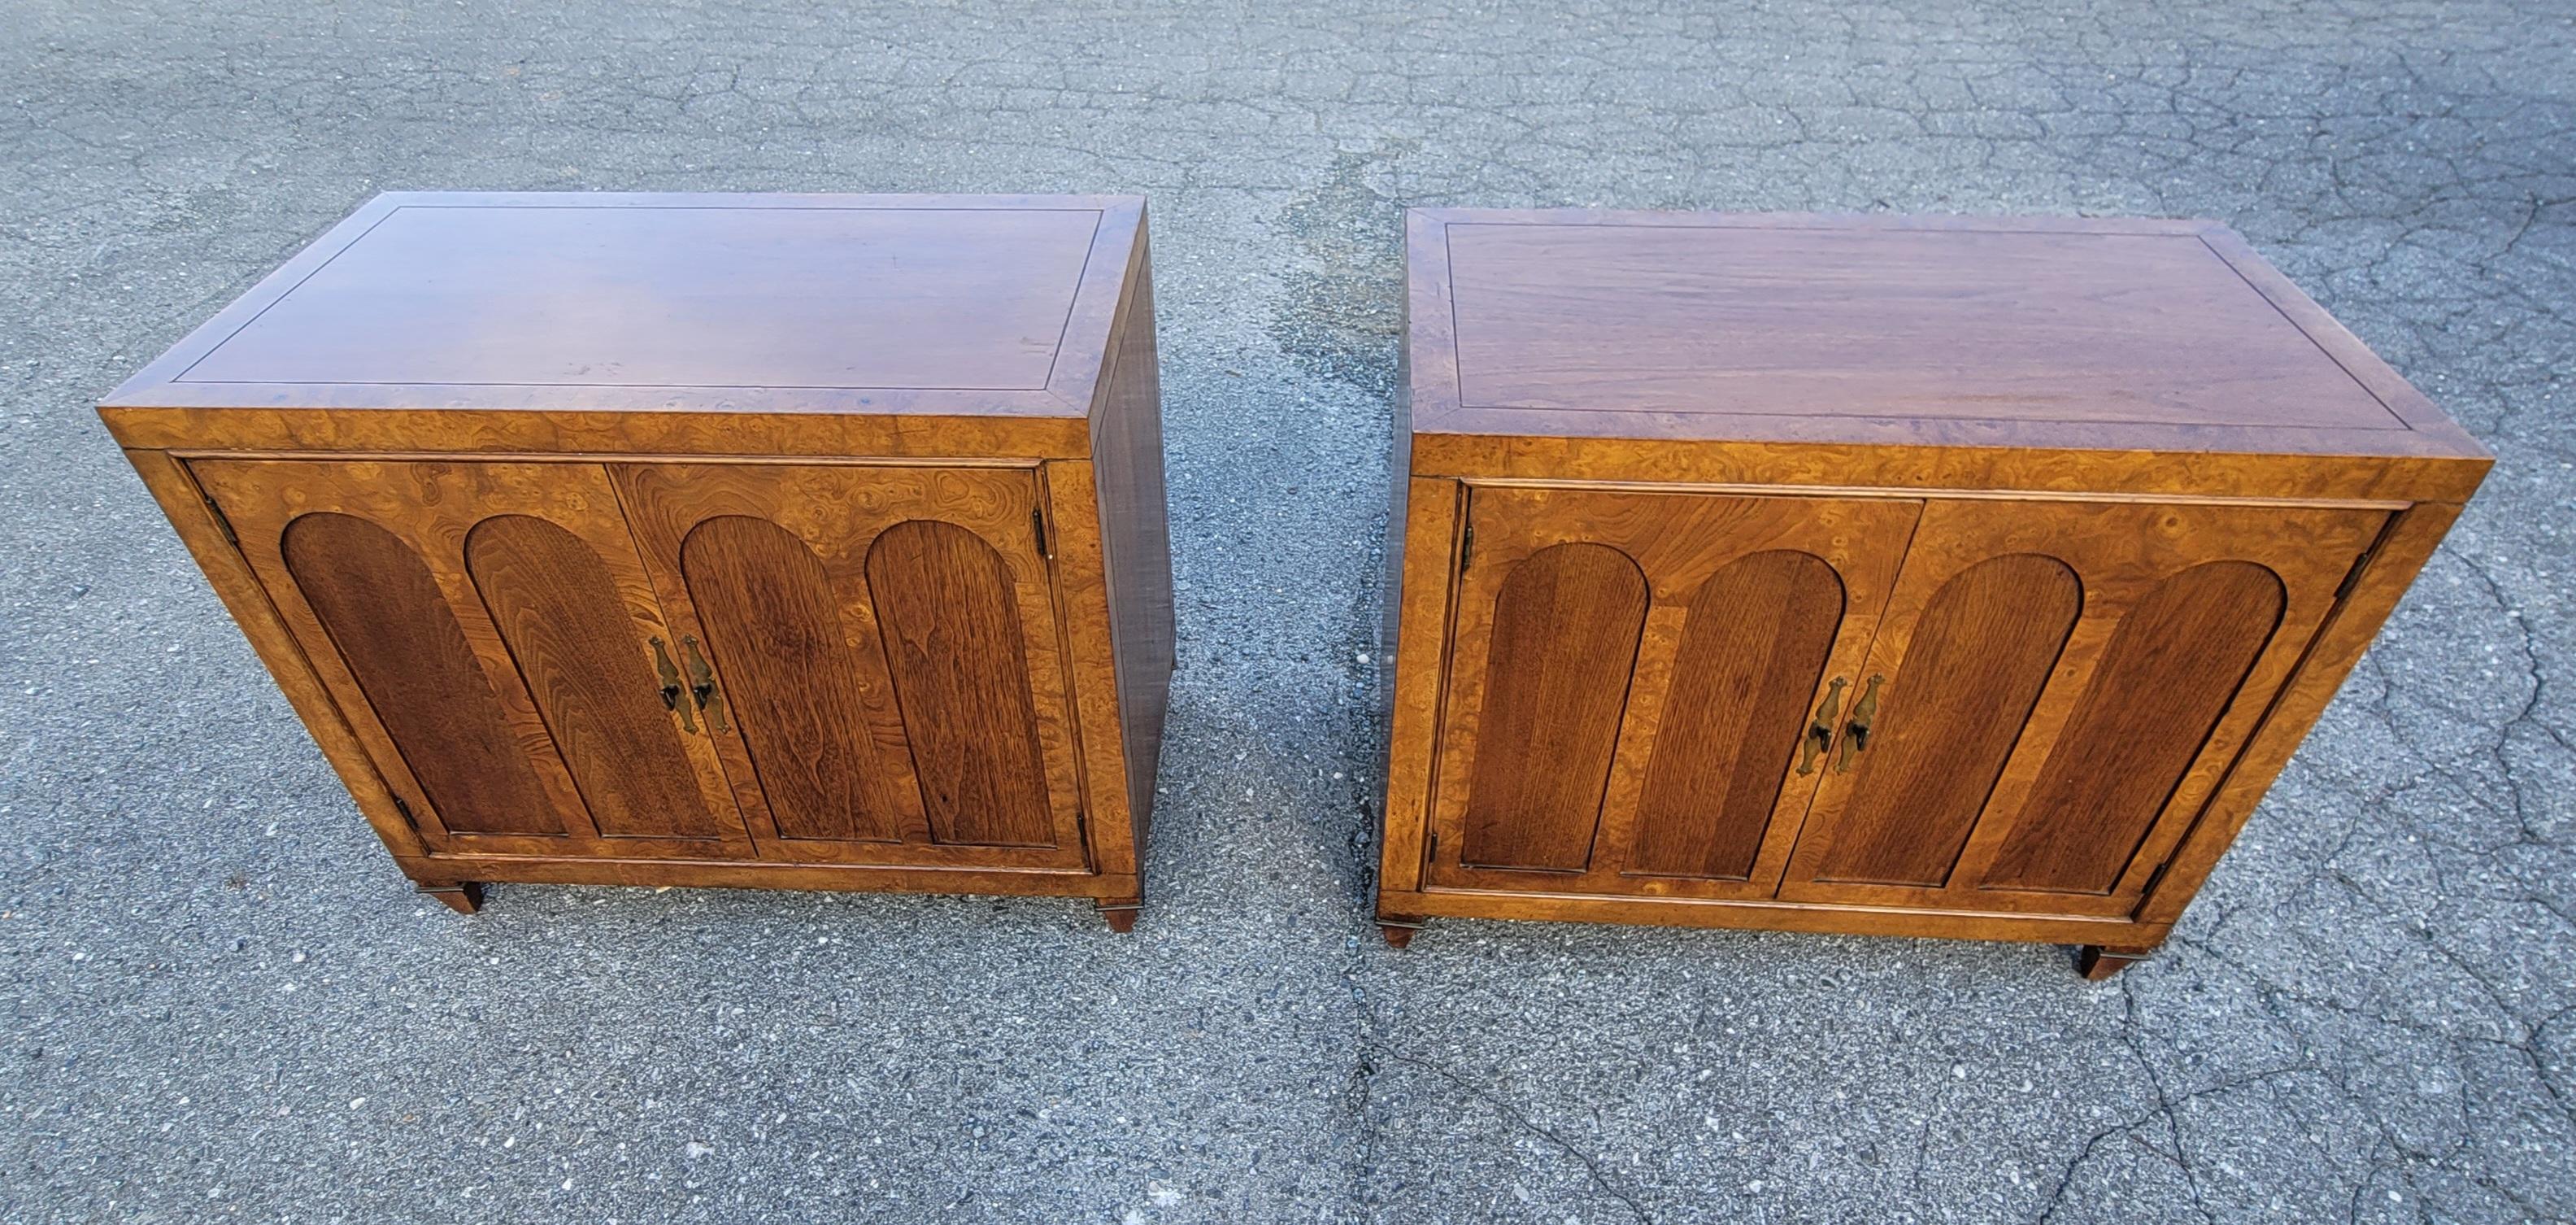 Pair of Mastercraft Burled and Walnut Colonnade Cabinets Credenza Buffet Server For Sale 3